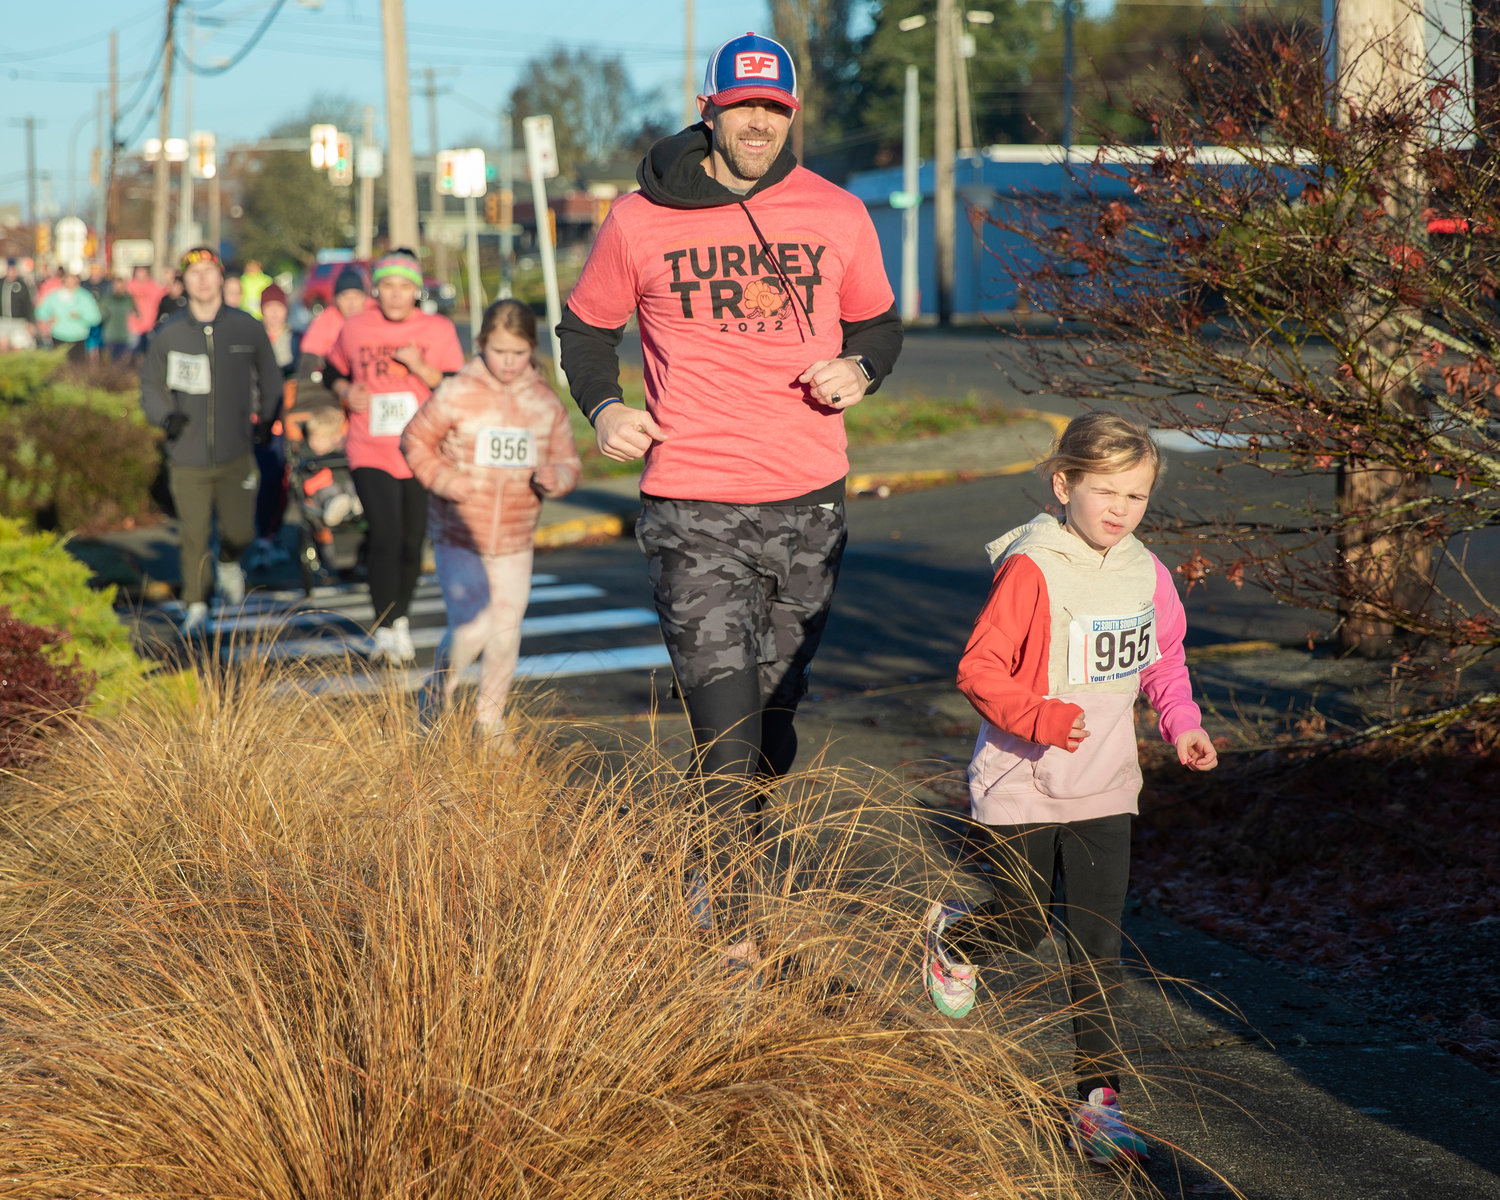 Commissioner Sean Swope smiles while participating with family in the Turkey Trot 5K Thanksgiving morning in Chehalis.